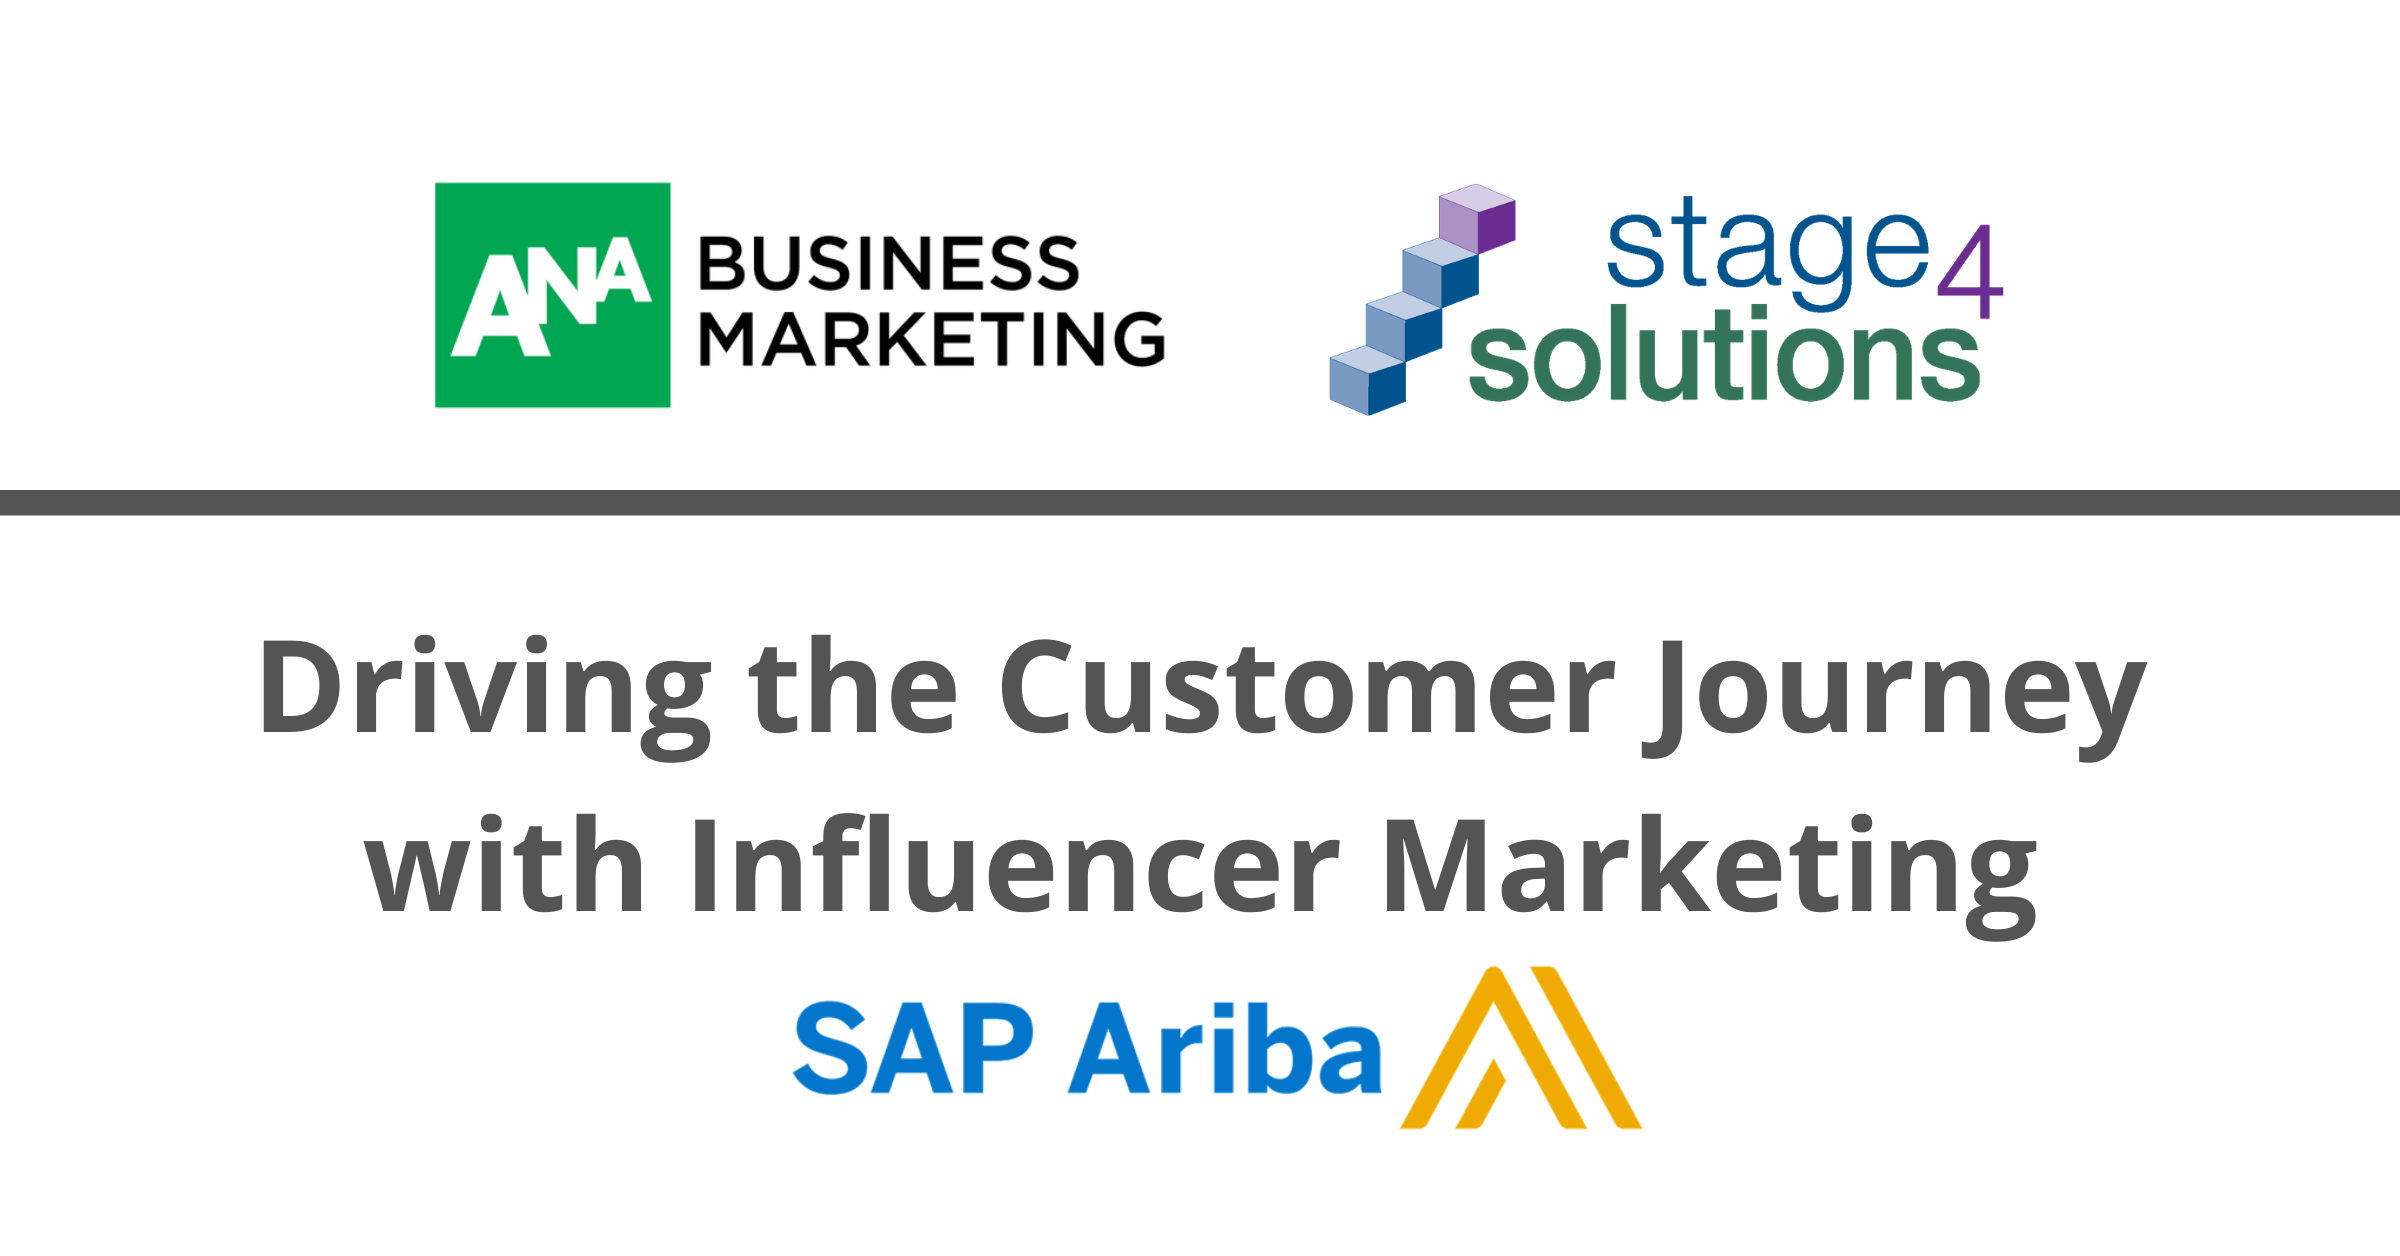 In this session, you will discover how SAP is driving real B2B ROI and brand awareness with influencer marketing.